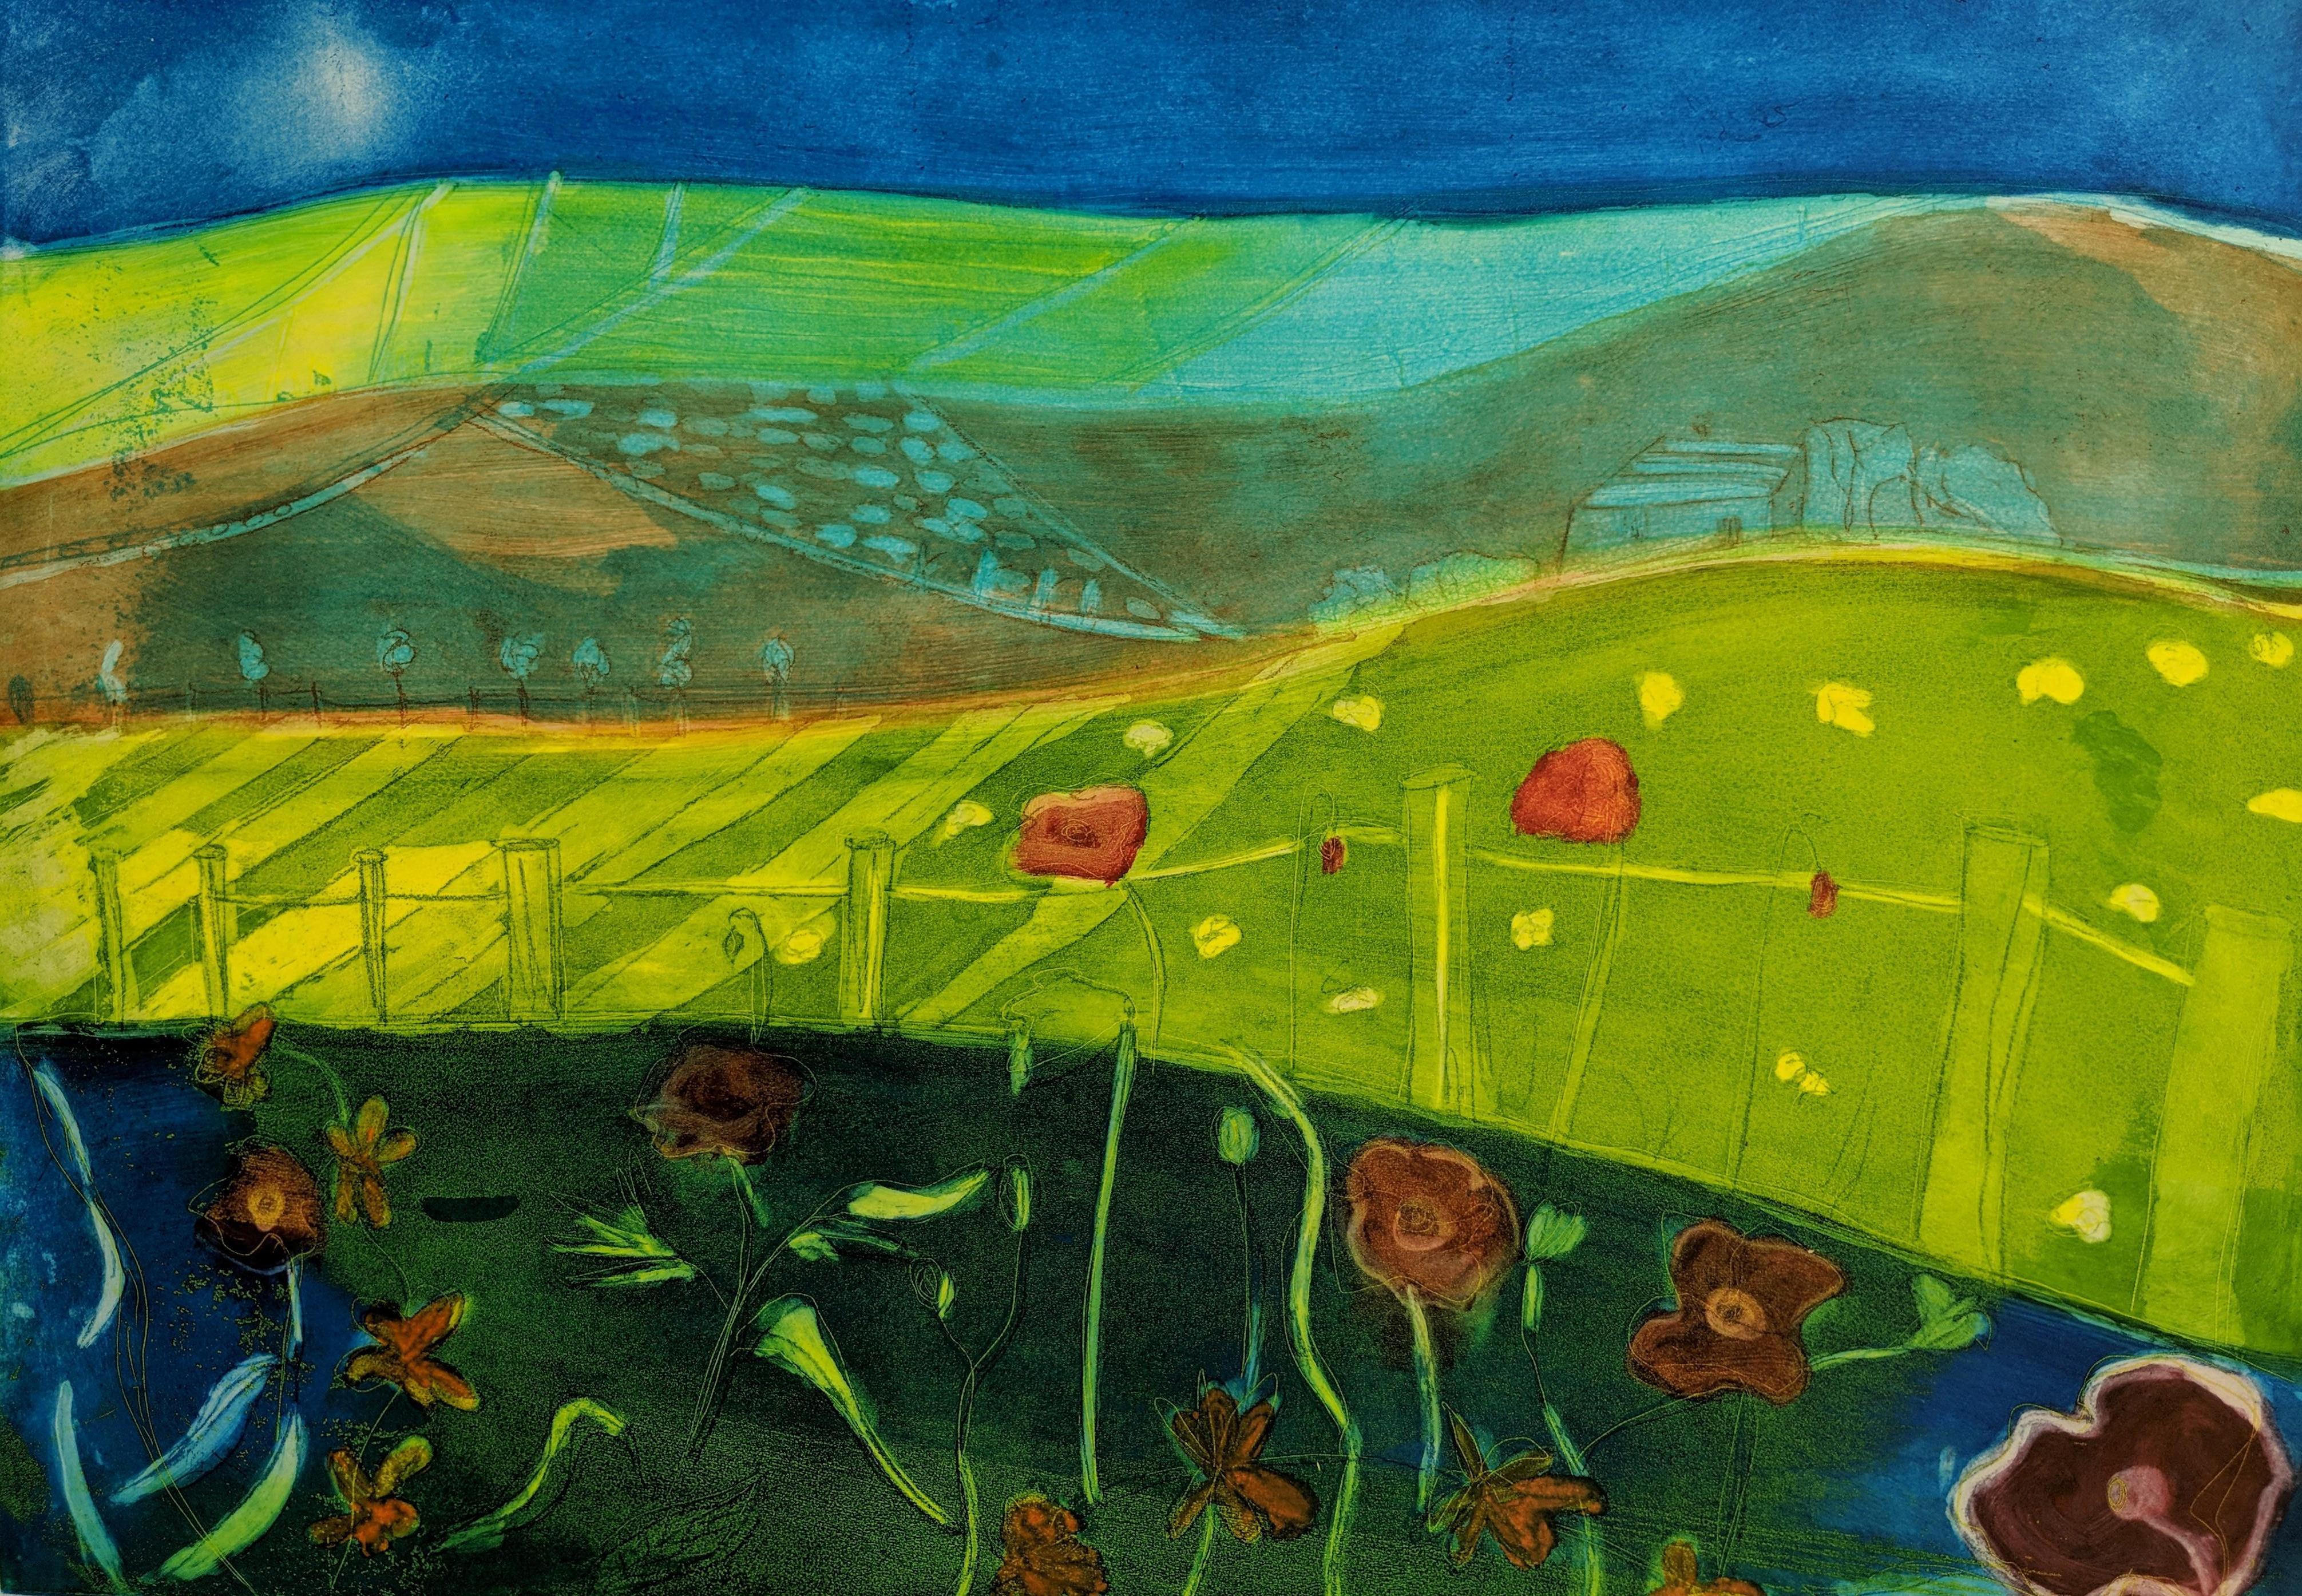 The Hills at Dusk - vibrant colour and fluid line print etching